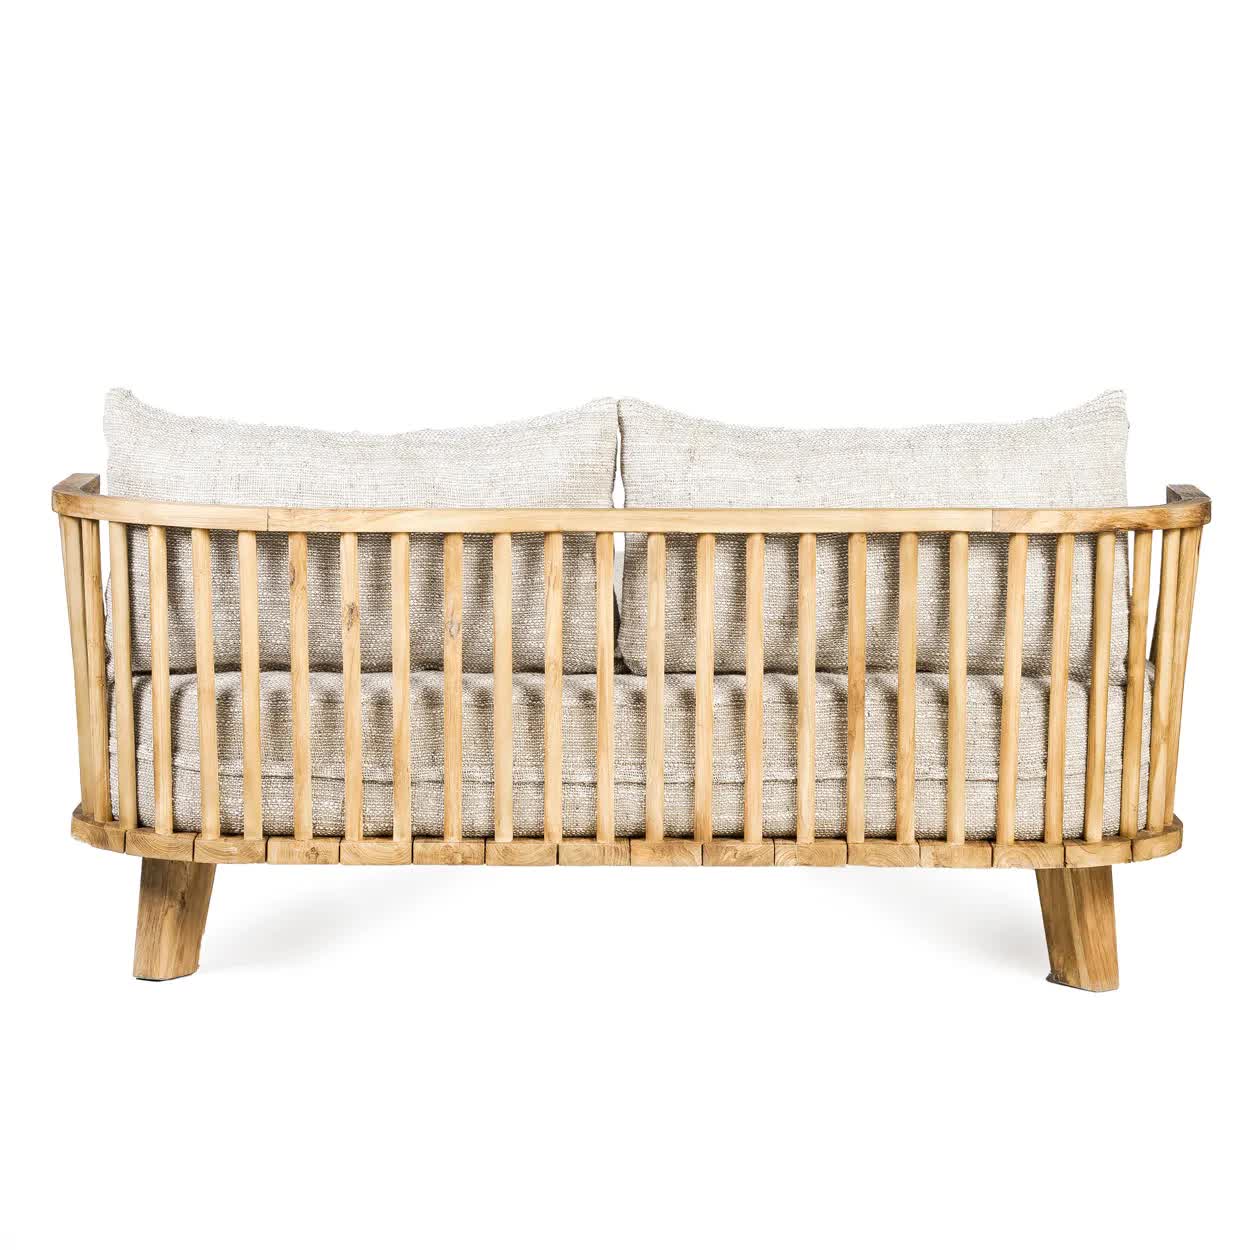 THE MALAWI Double Daybed Natural Beige